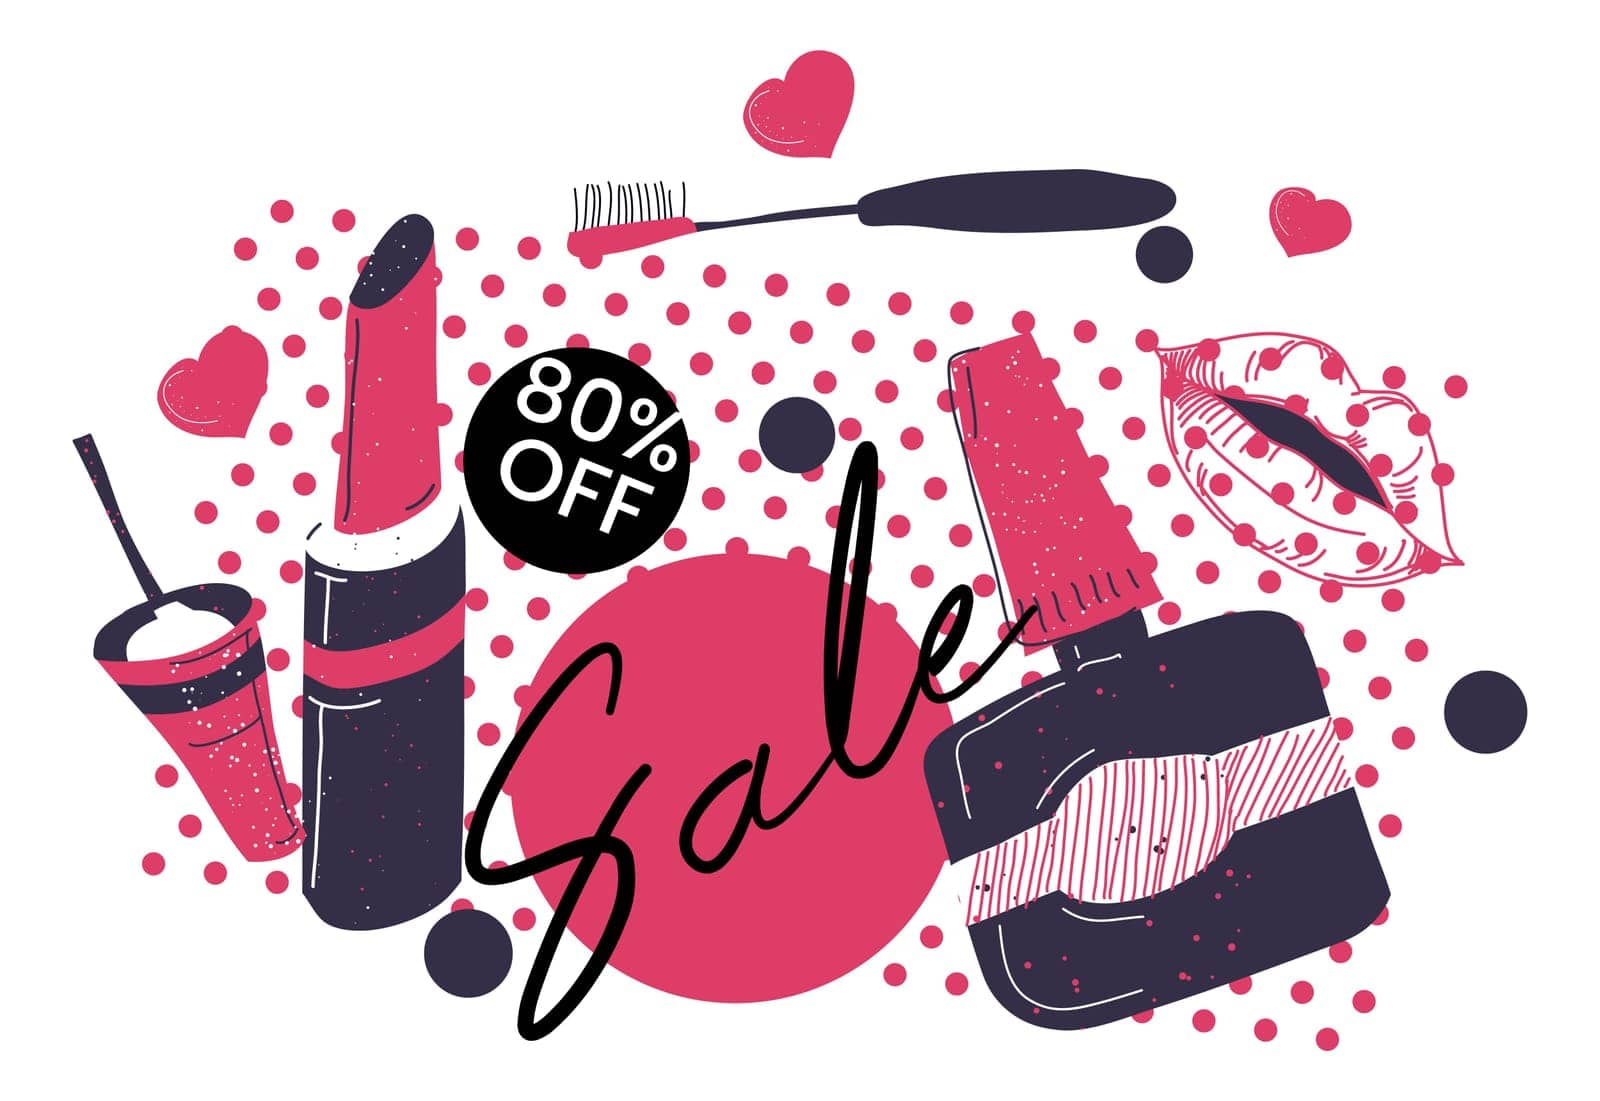 Cosmetic products and beauty, promotional banner with sale up to 80 percent off. Glossy lipstick, nail polishing or gel, brushes and skincare. Discounts and clearance shop. Vector in flat style